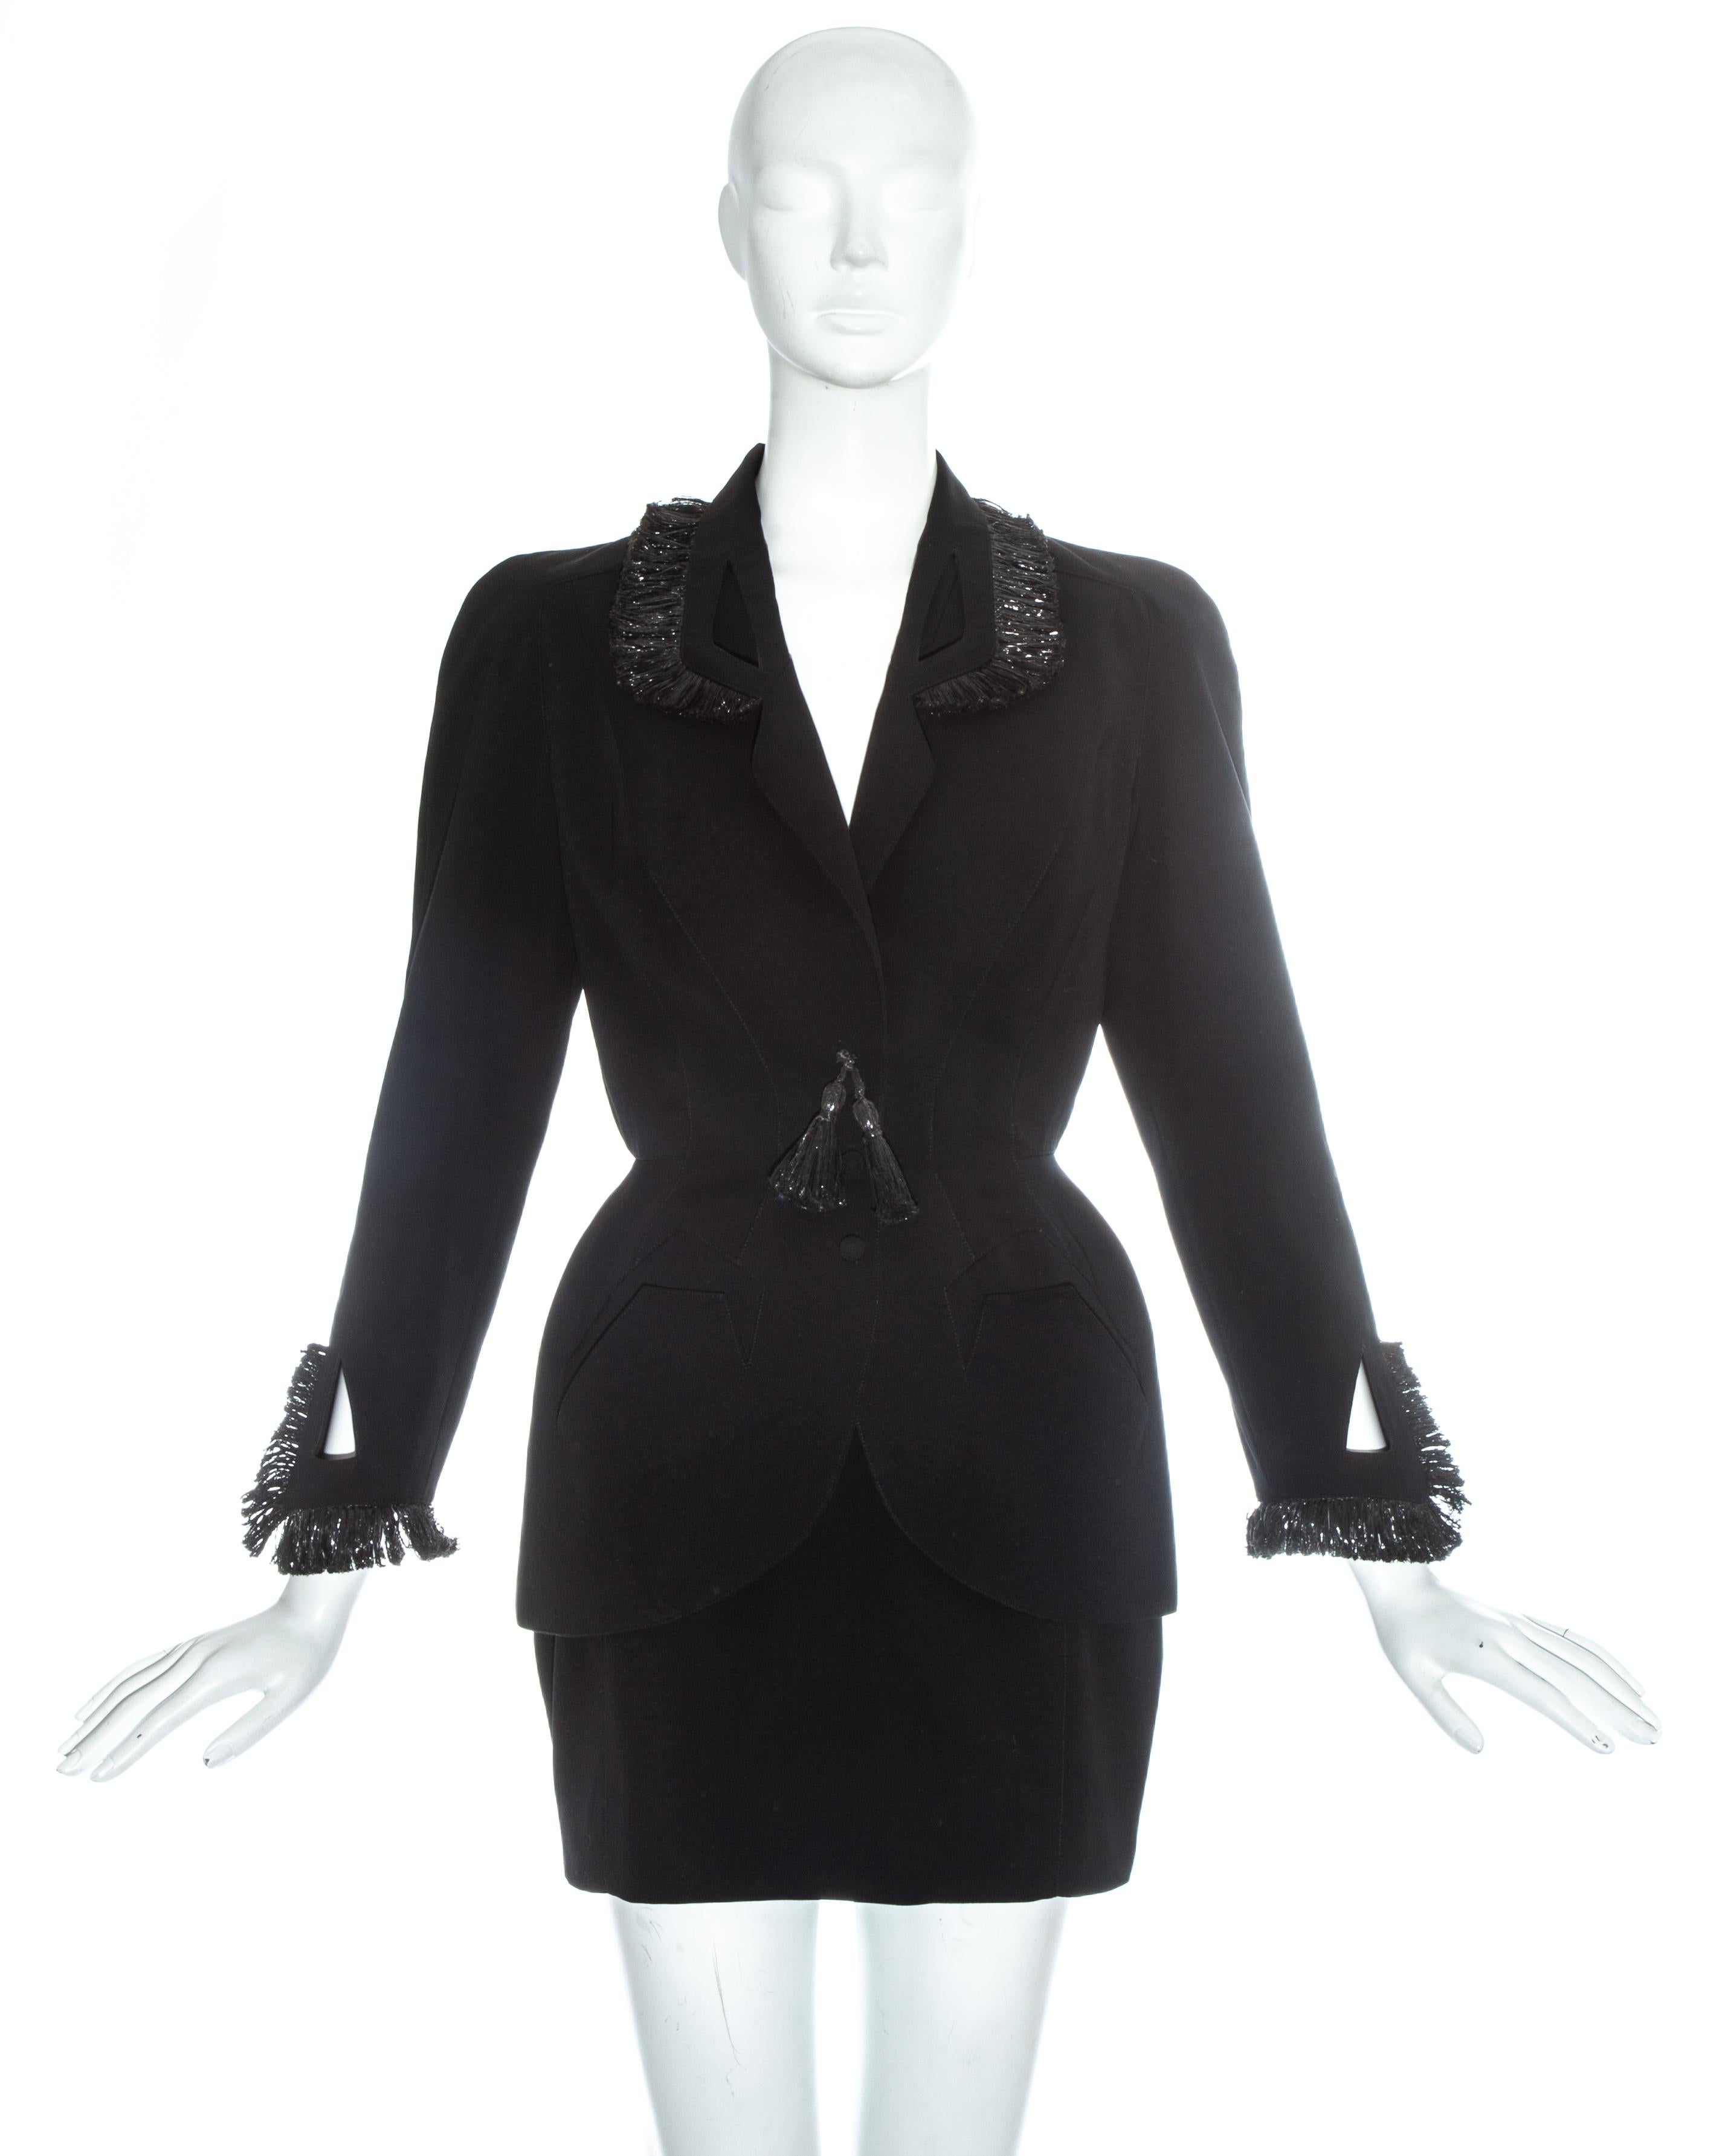 Thierry Mugler black wool mini skirt suit

- Blazer jacket with raffia trim, accentuated waist, and snap button closure
- High waisted matching mini skirt 

Spring-Summer 1995